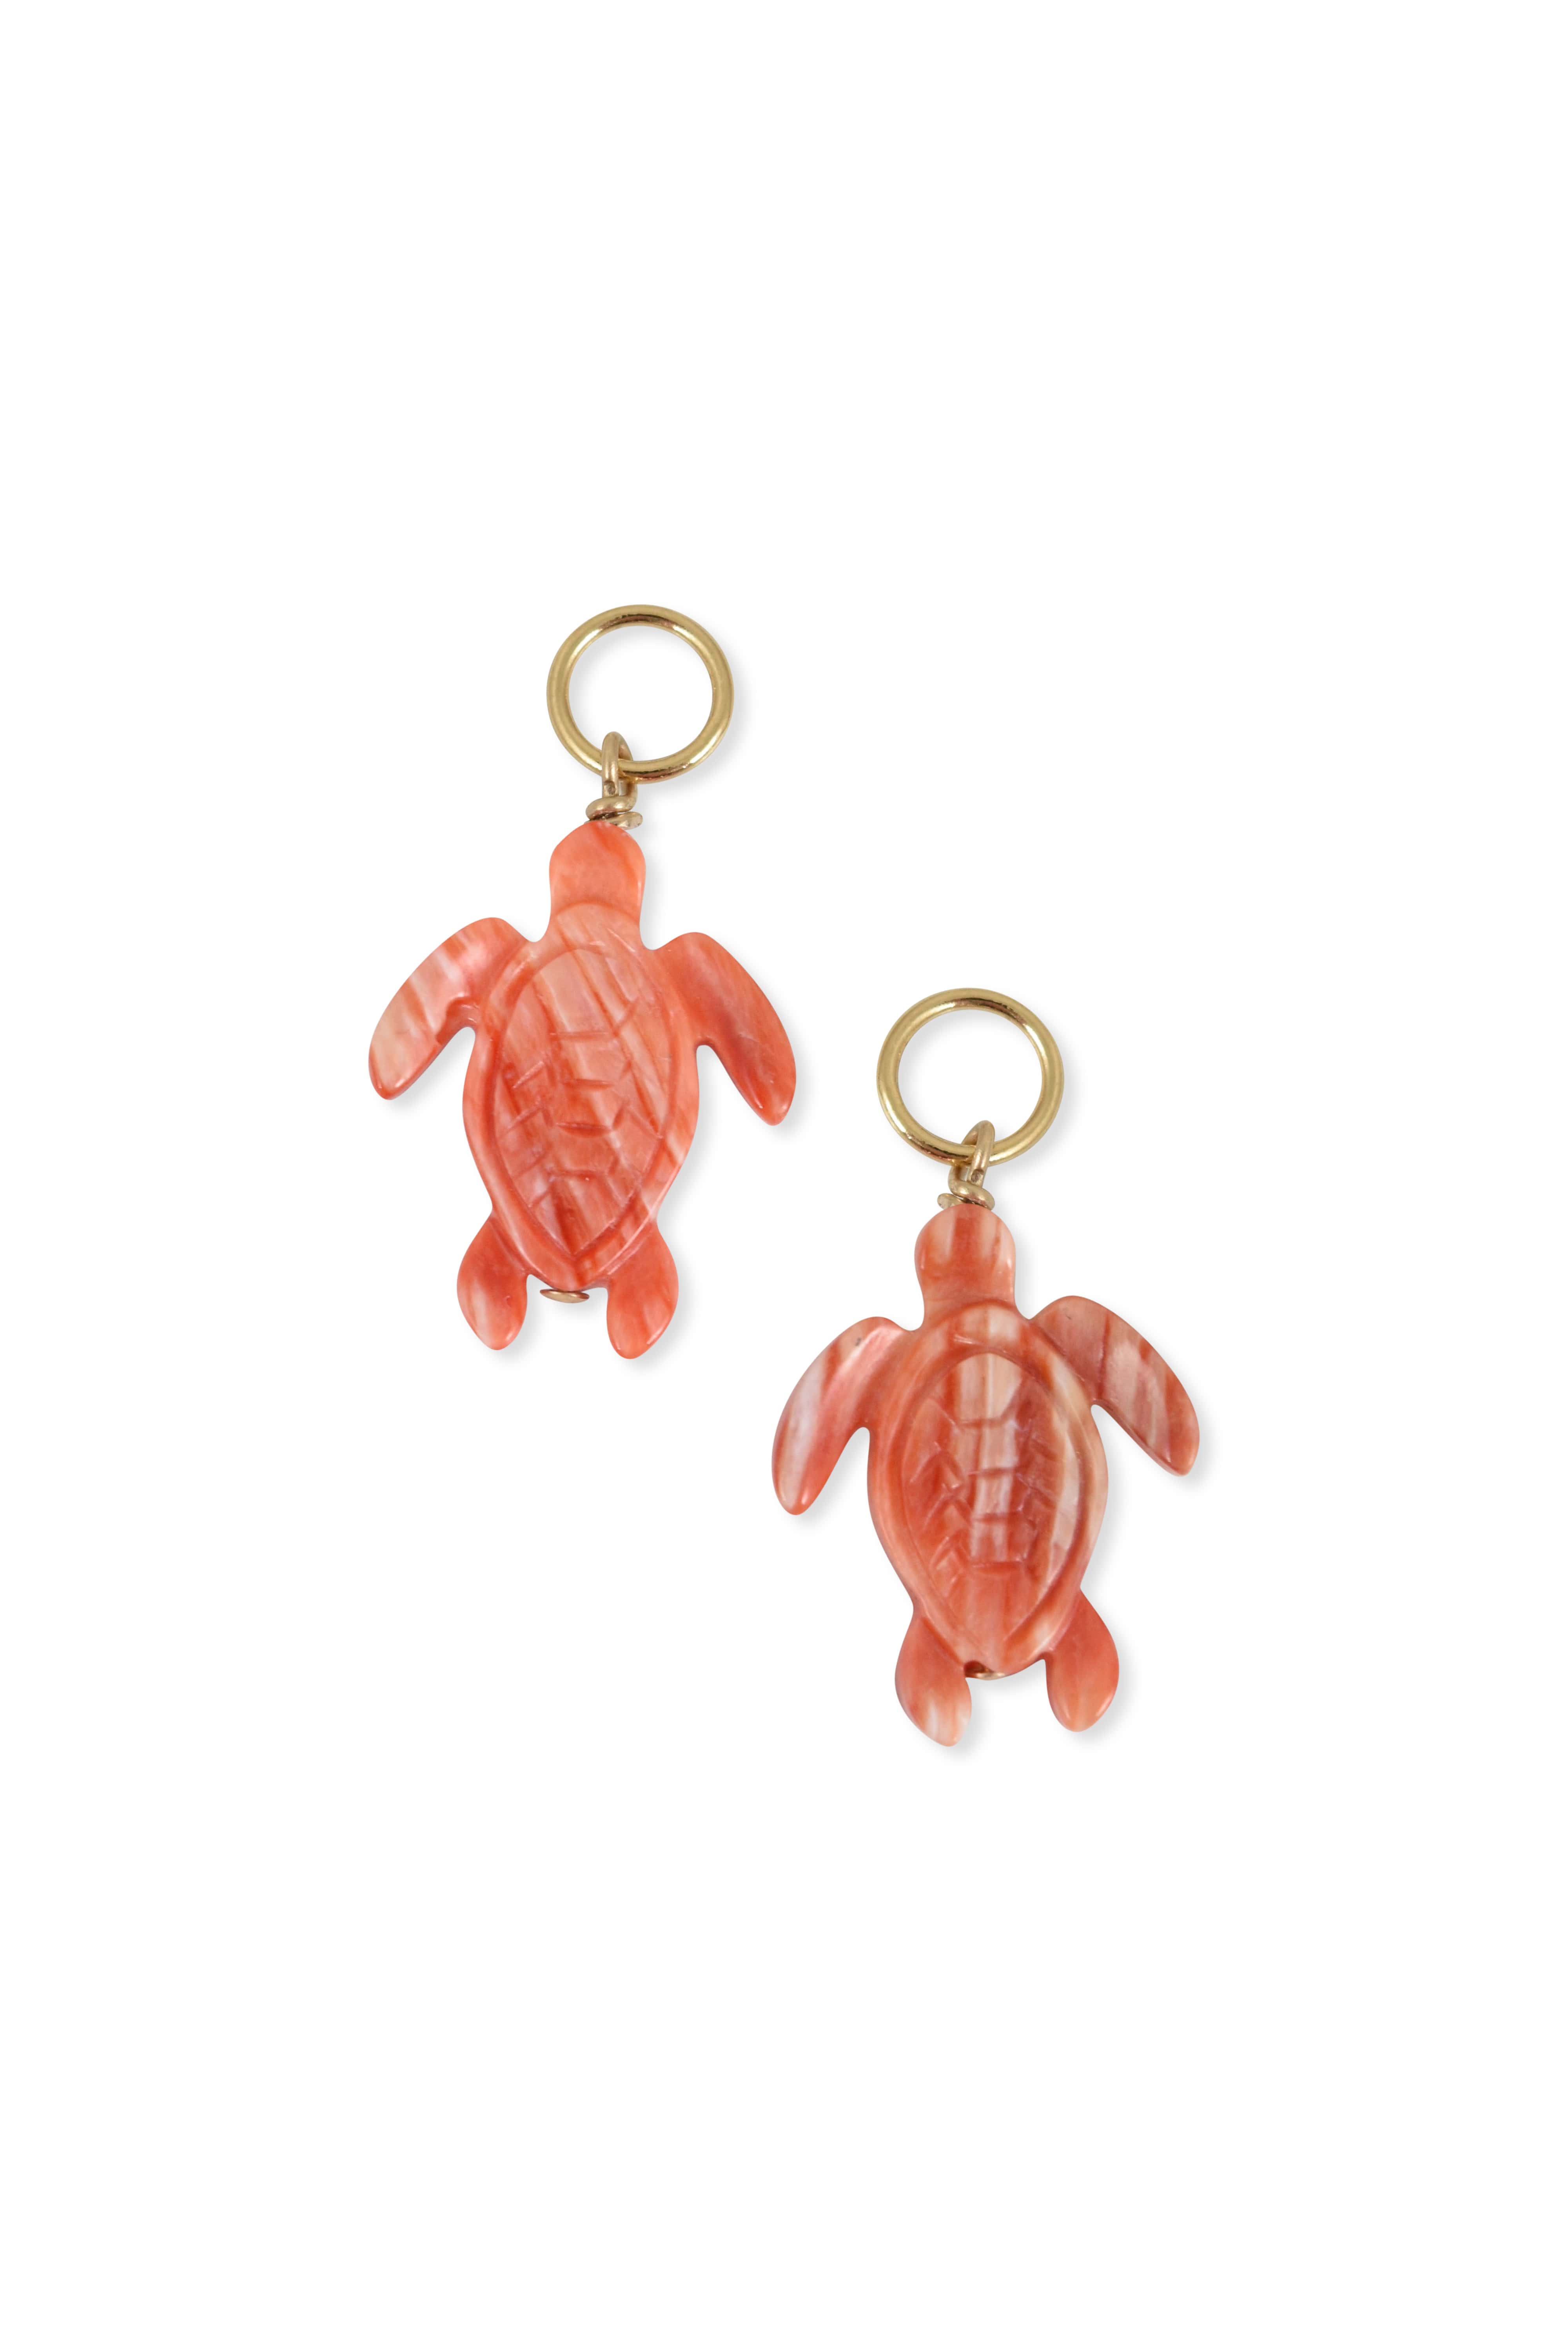 Turtle Charm in Orange Spiny Oyster